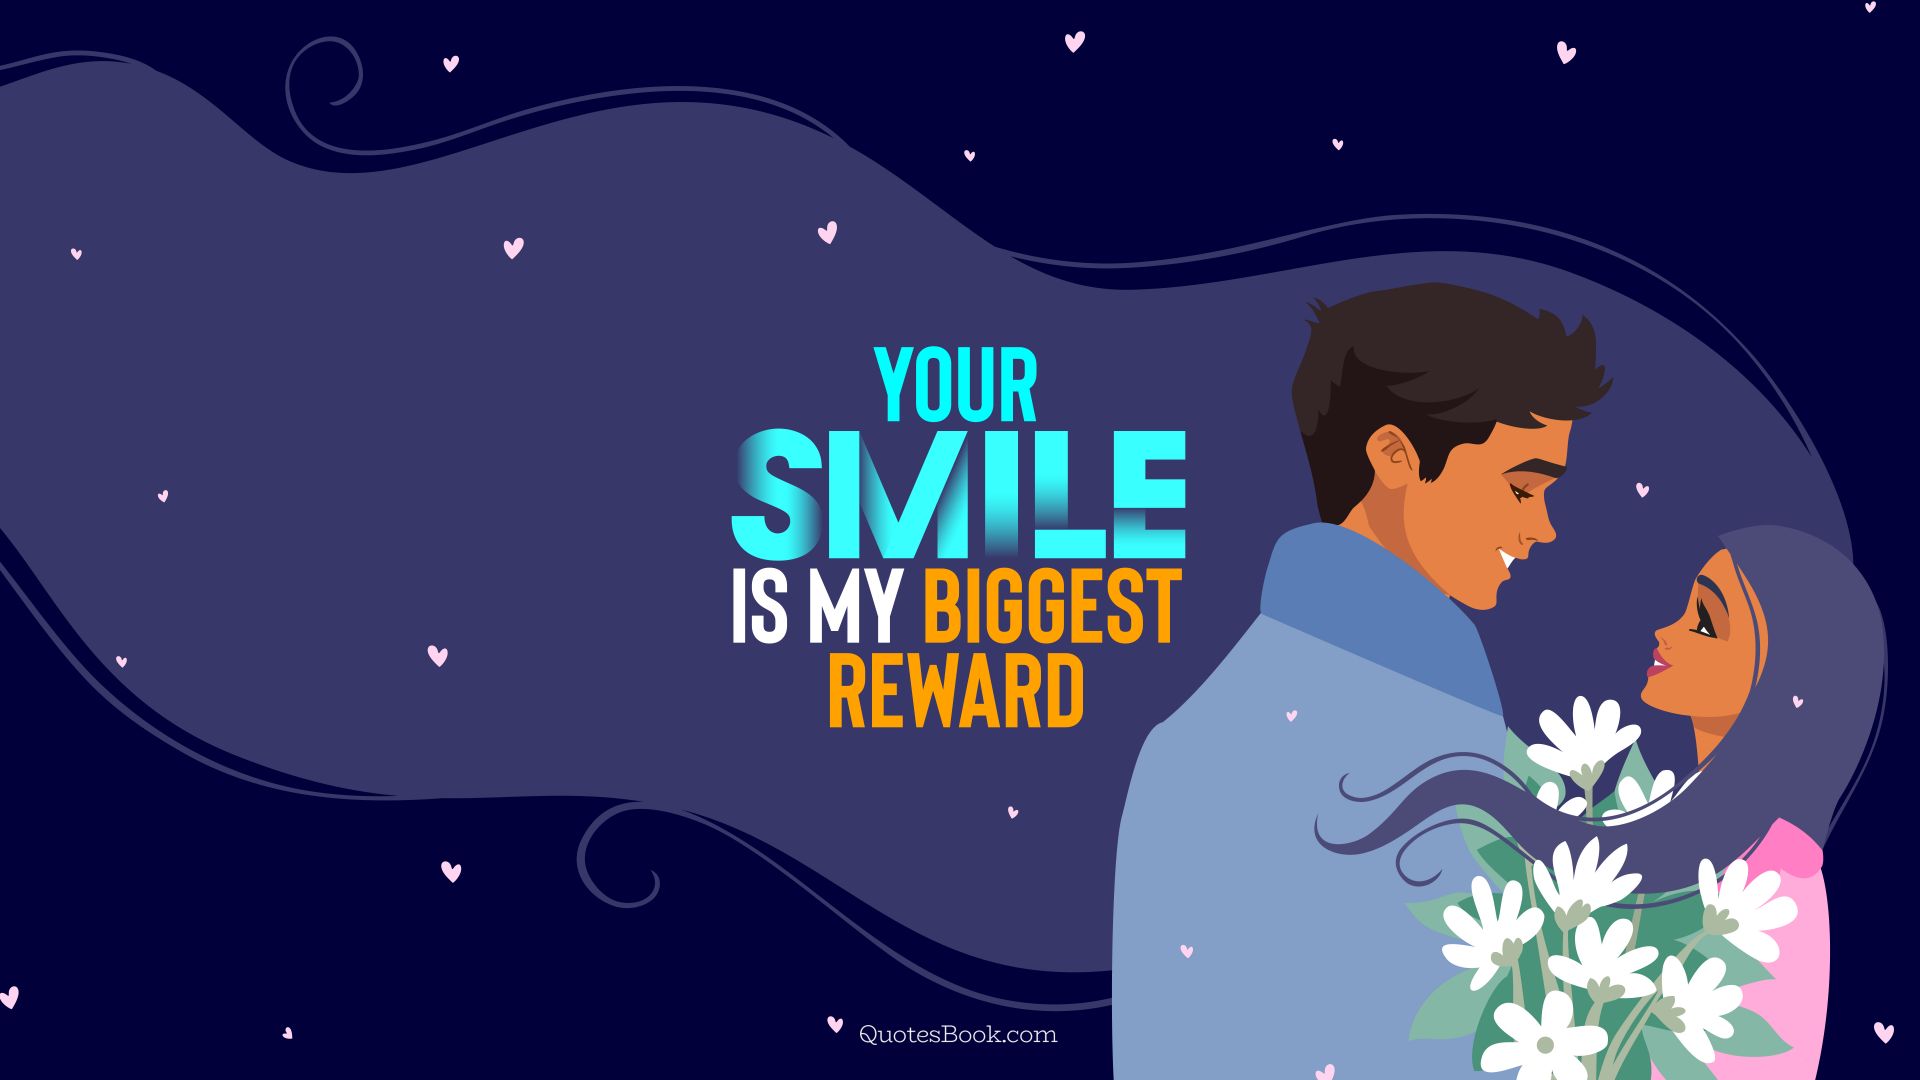 Your smile is my biggest reward. - Quote by QuotesBook